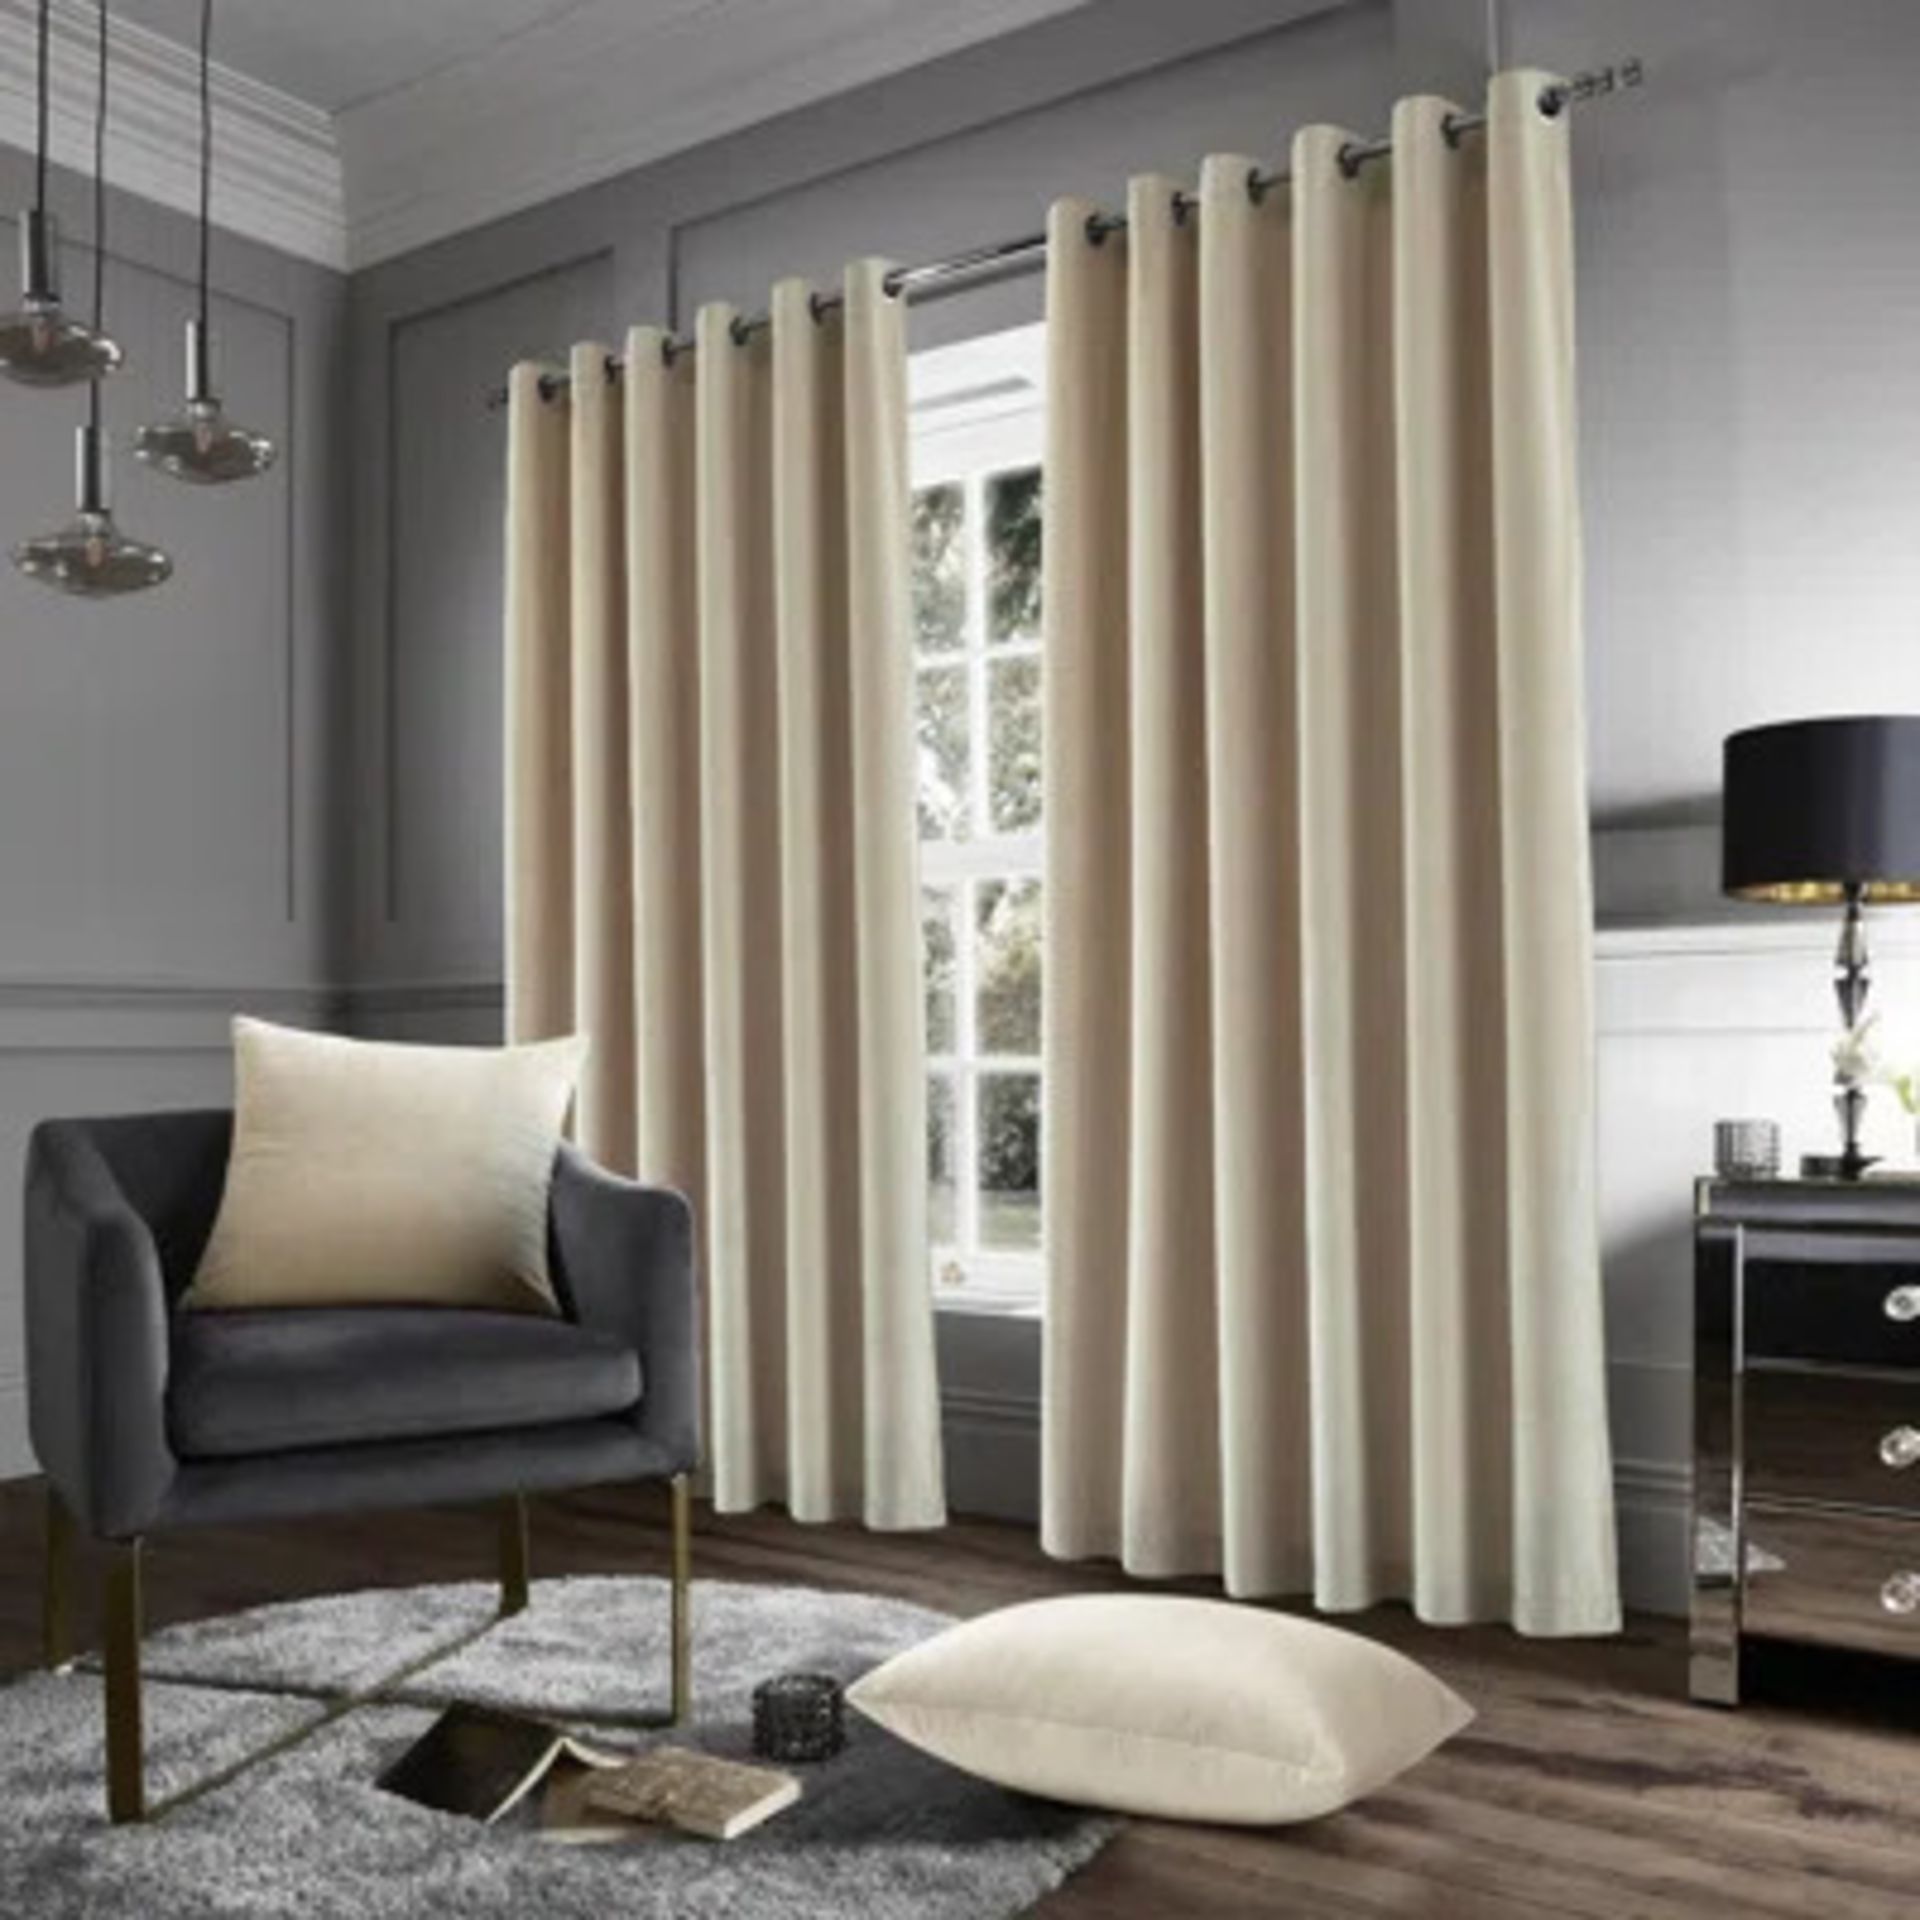 RRP £35.99 - Crushed Velvet Eyelet Sheer Curtains Colour: Beige, Panel Size: Width 168 x Drop 183